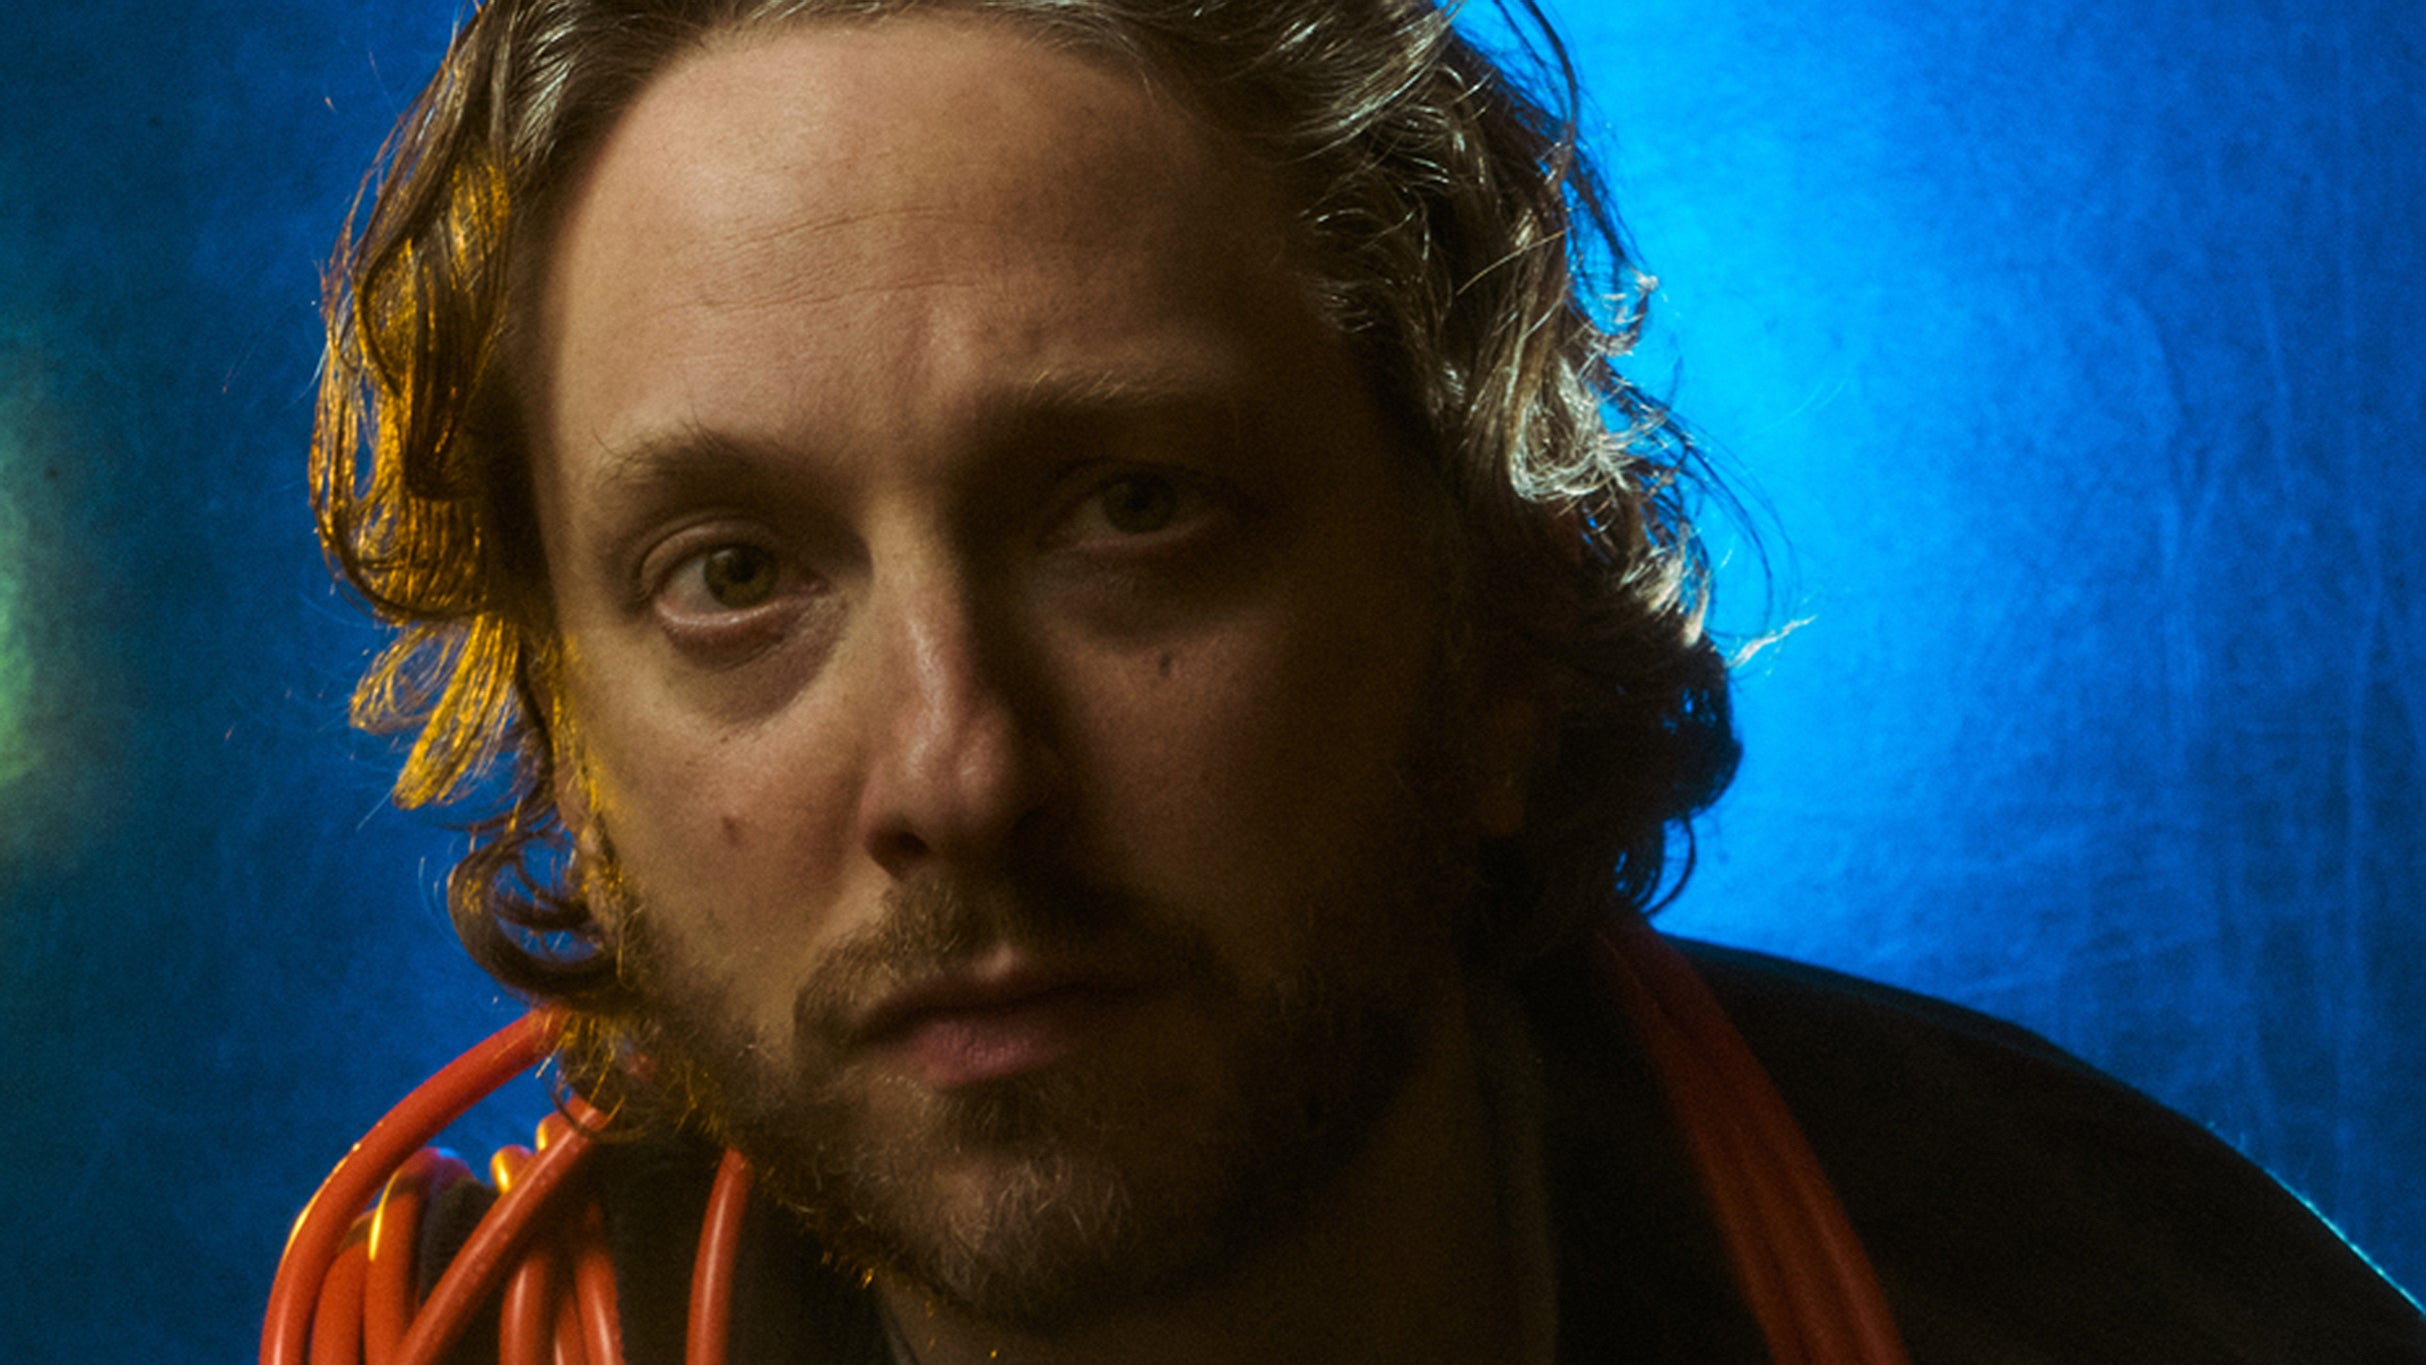 Oneohtrix Point Never at Brooklyn Paramount